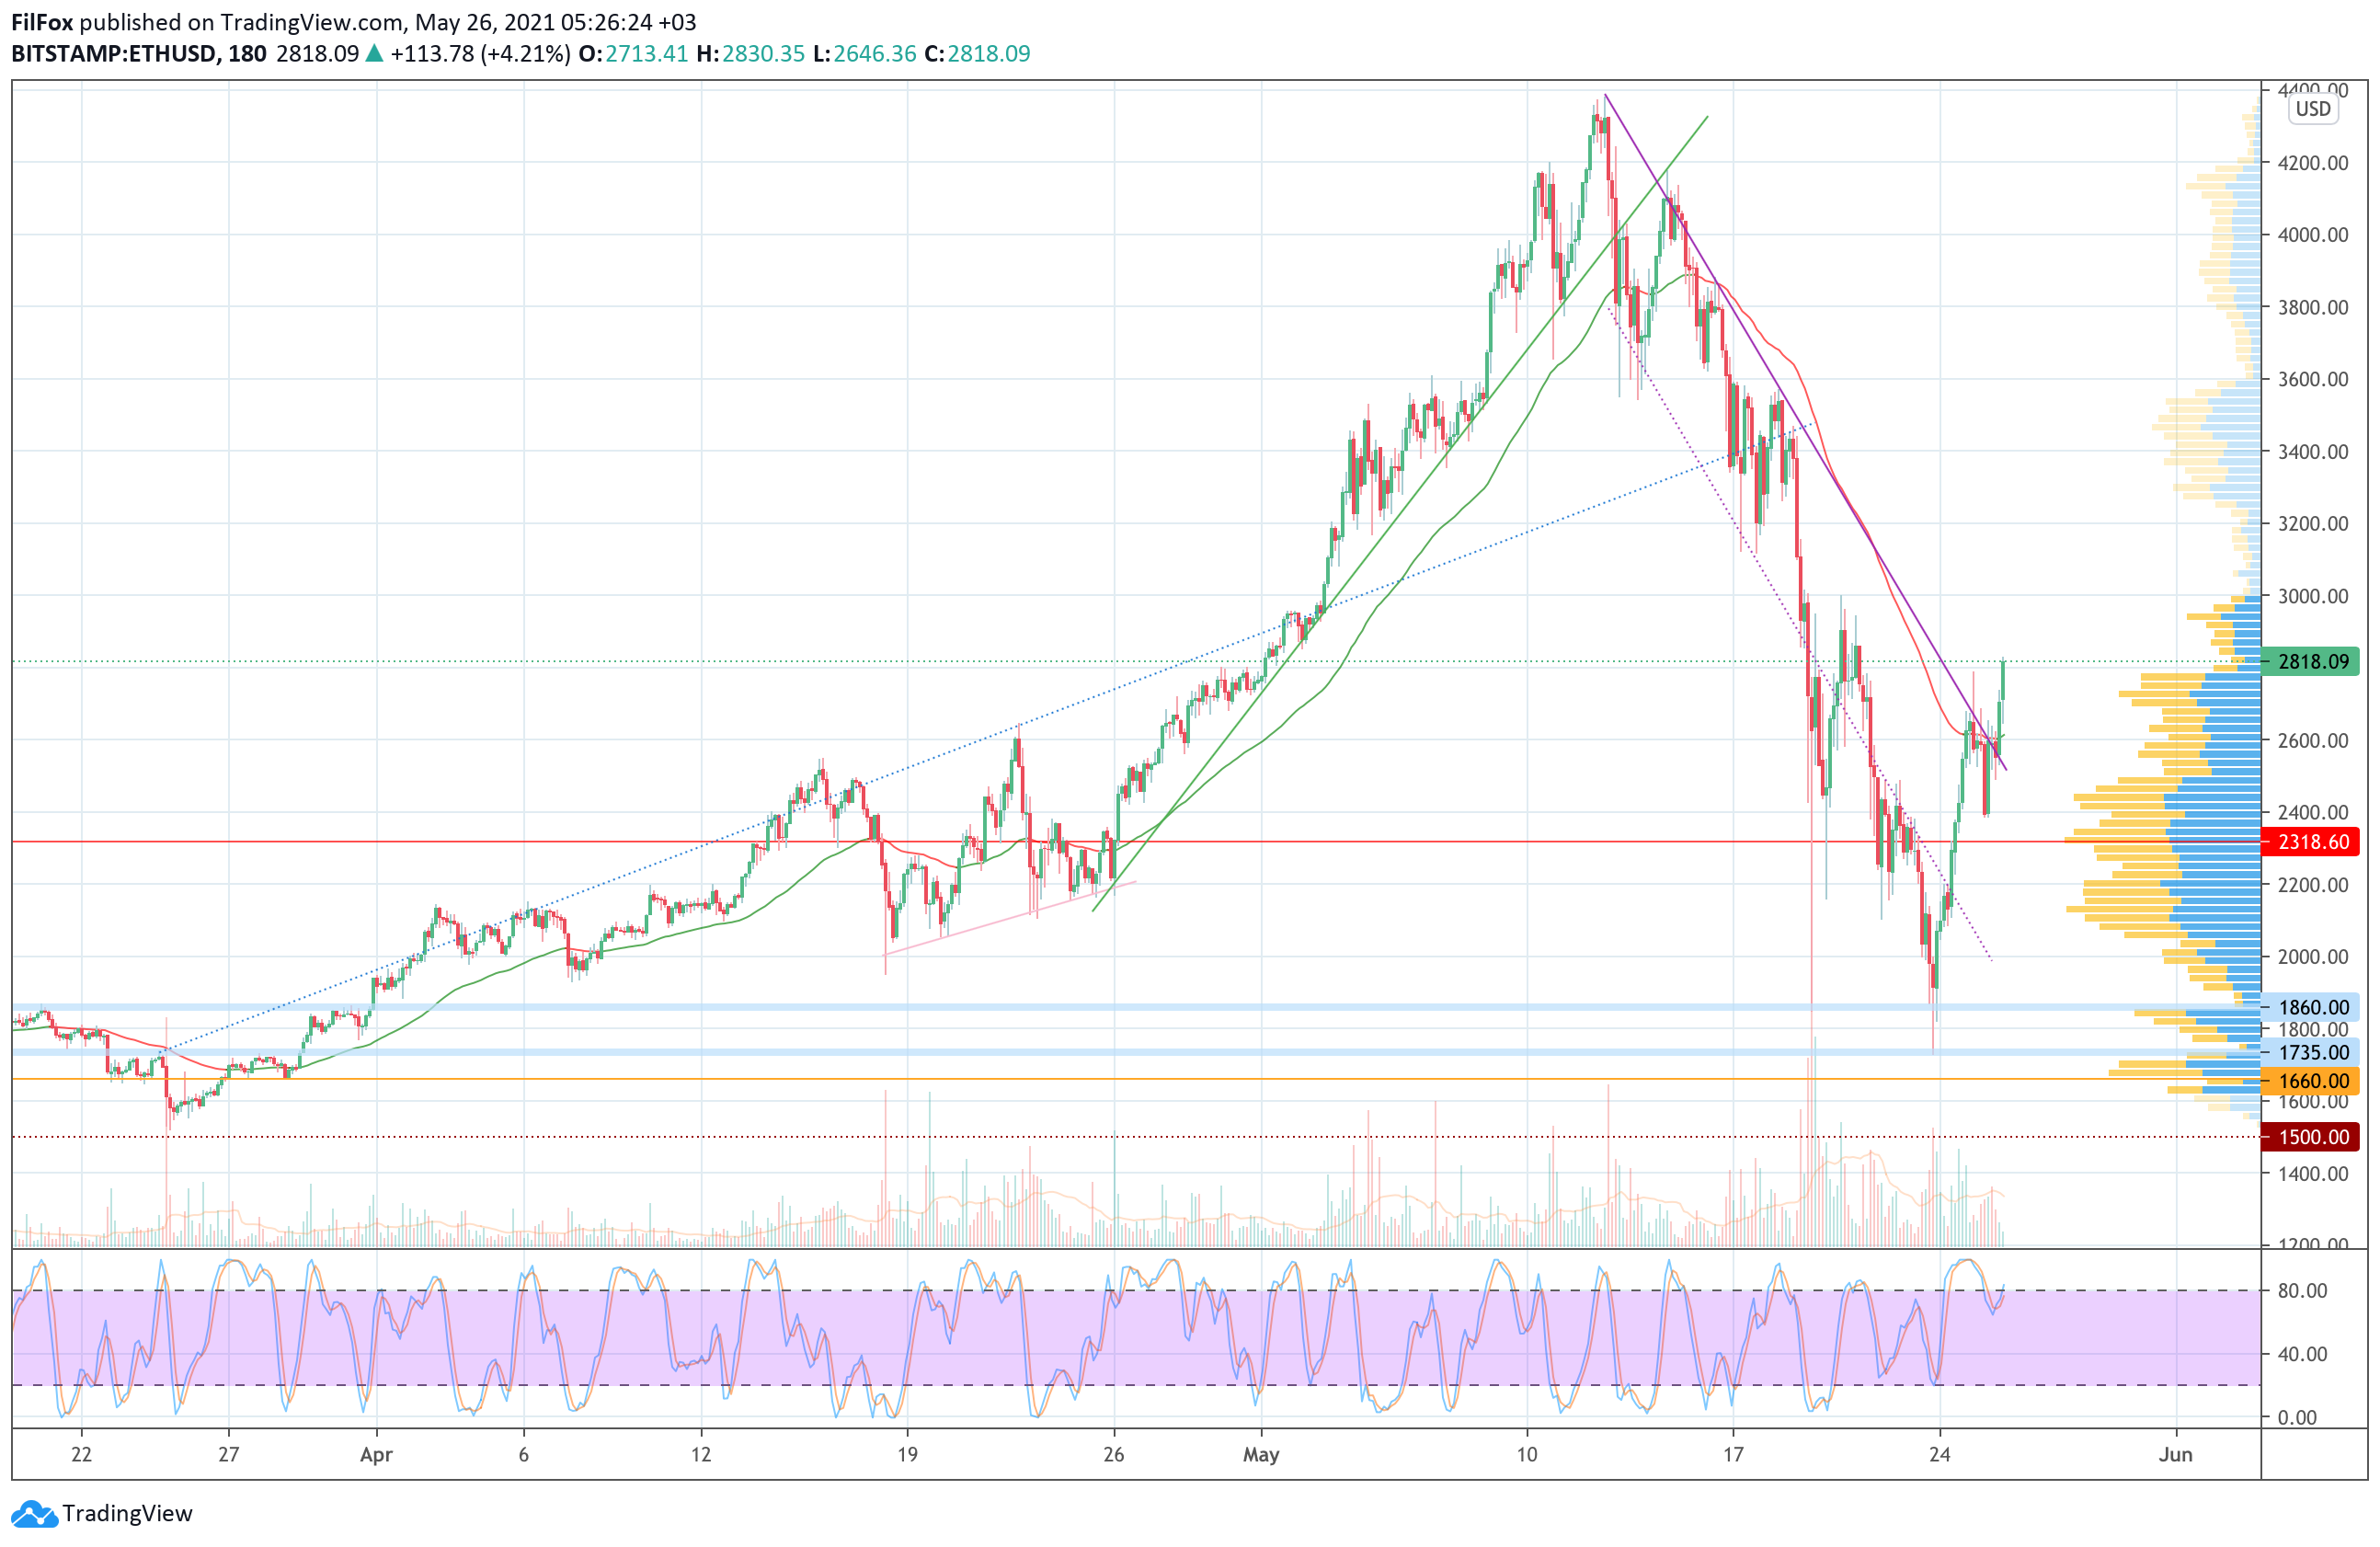 Analysis of the prices of Bitcoin, Ethereum, XRP for 05/26/2021